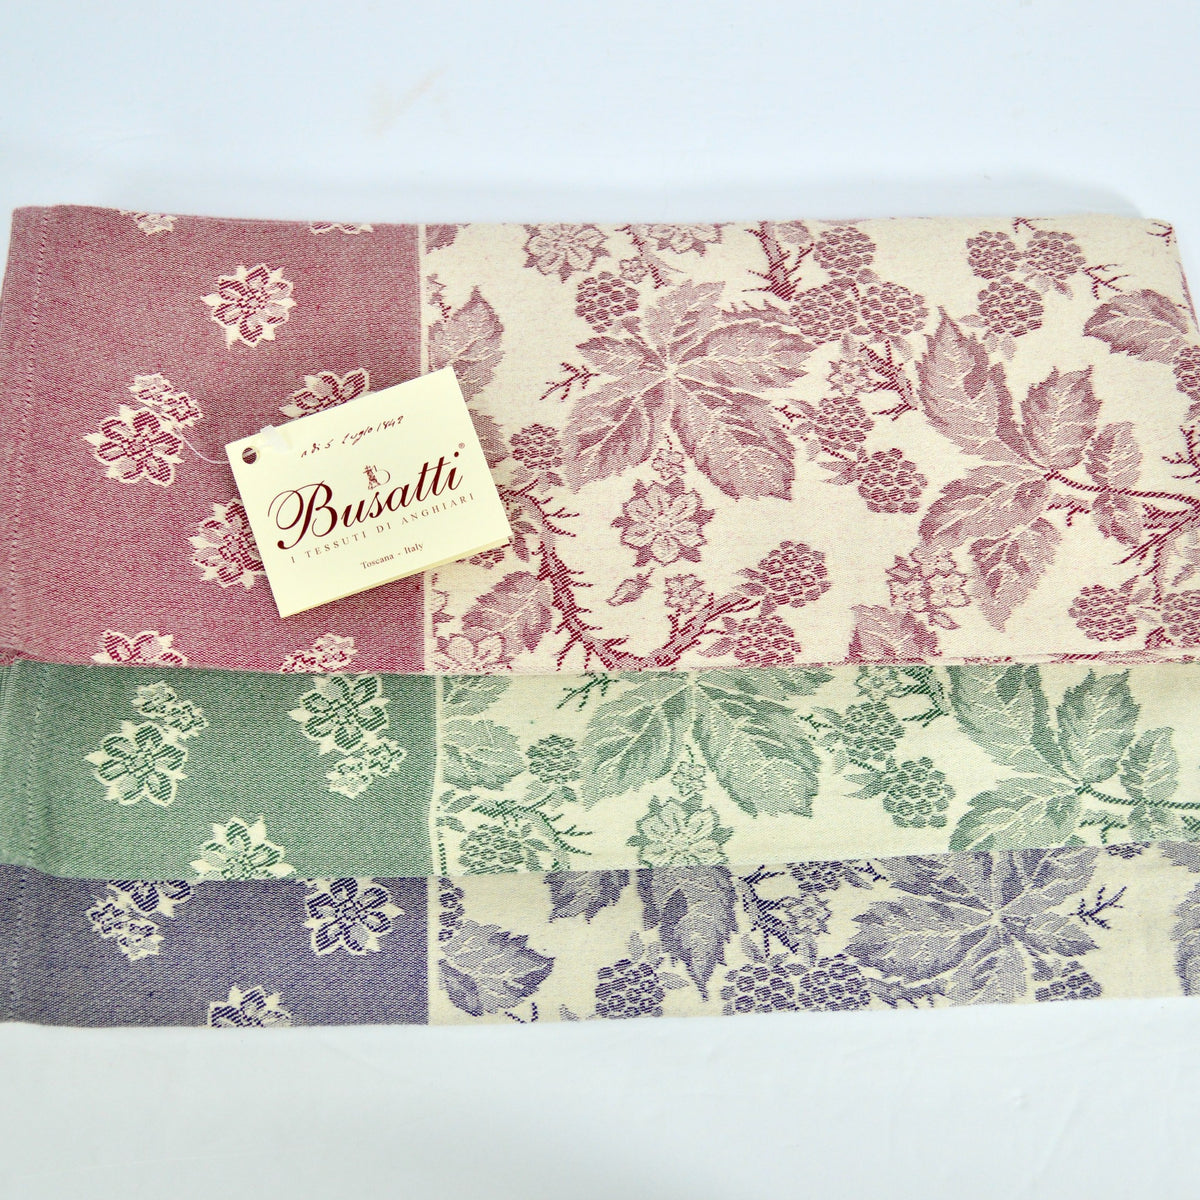 Busatti Berry Kitchen Towel, Assorted Colors, Made in Italy - My Italian Decor